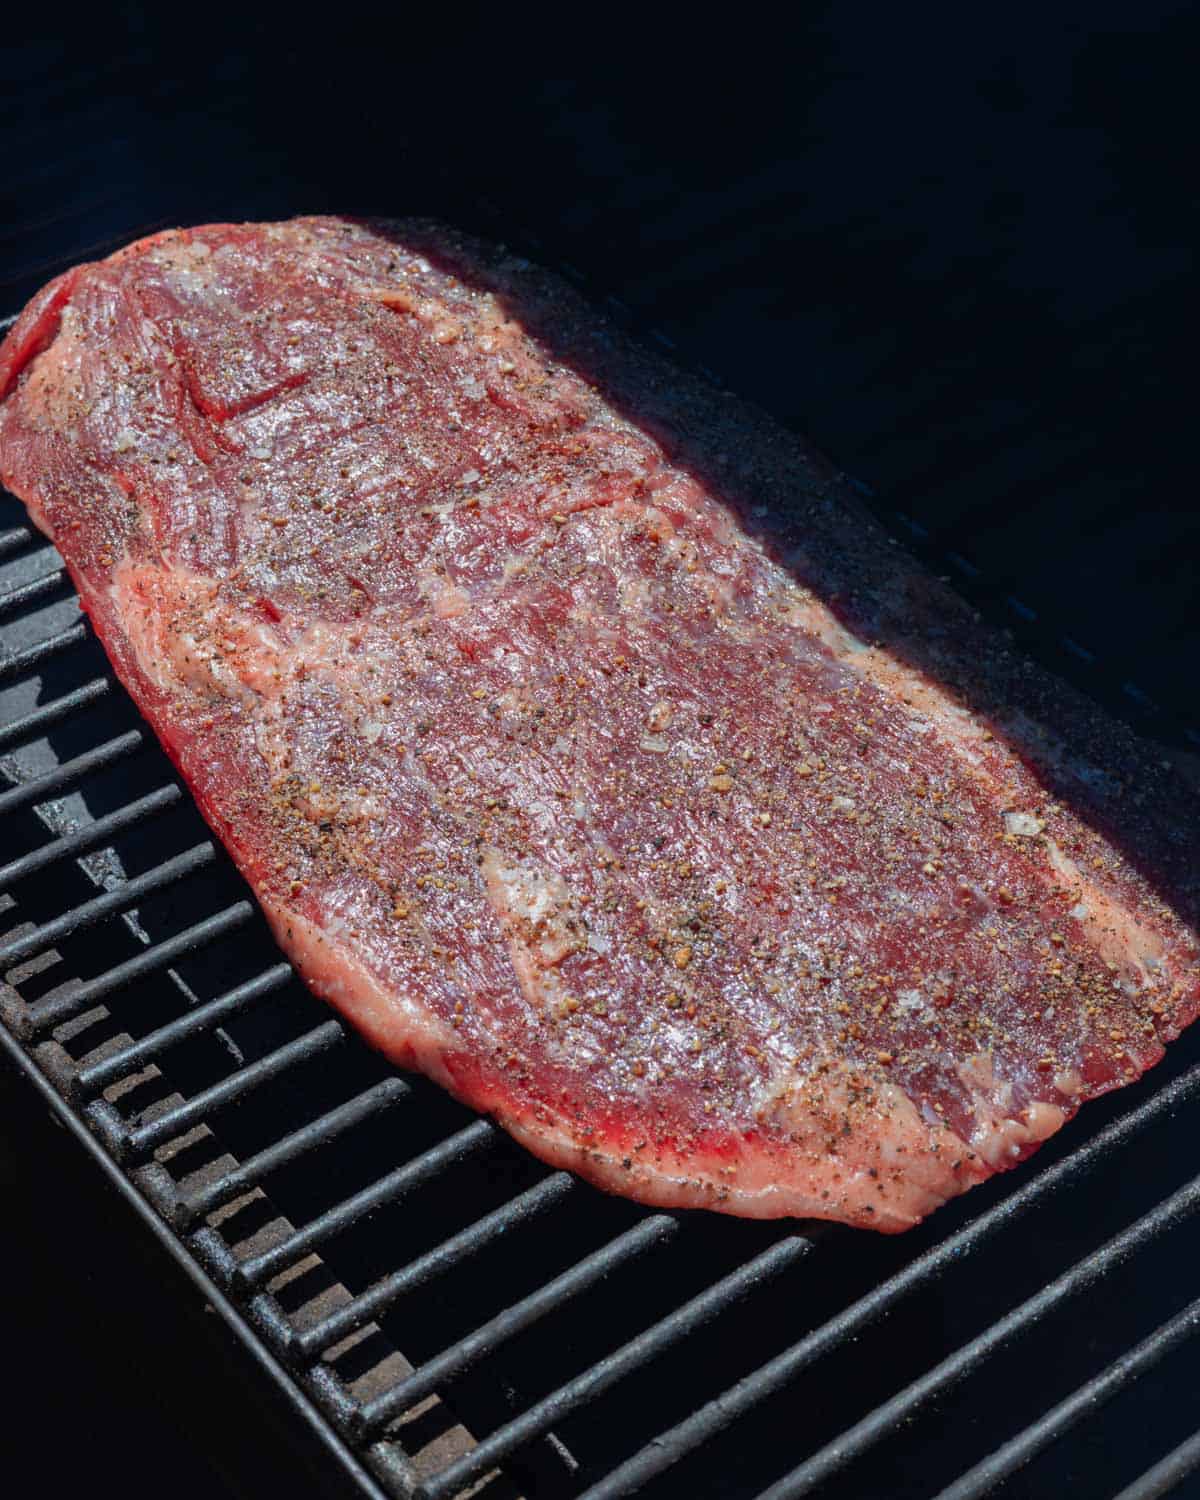 Flank steak, seasoned and placed on the smoker grill grates.